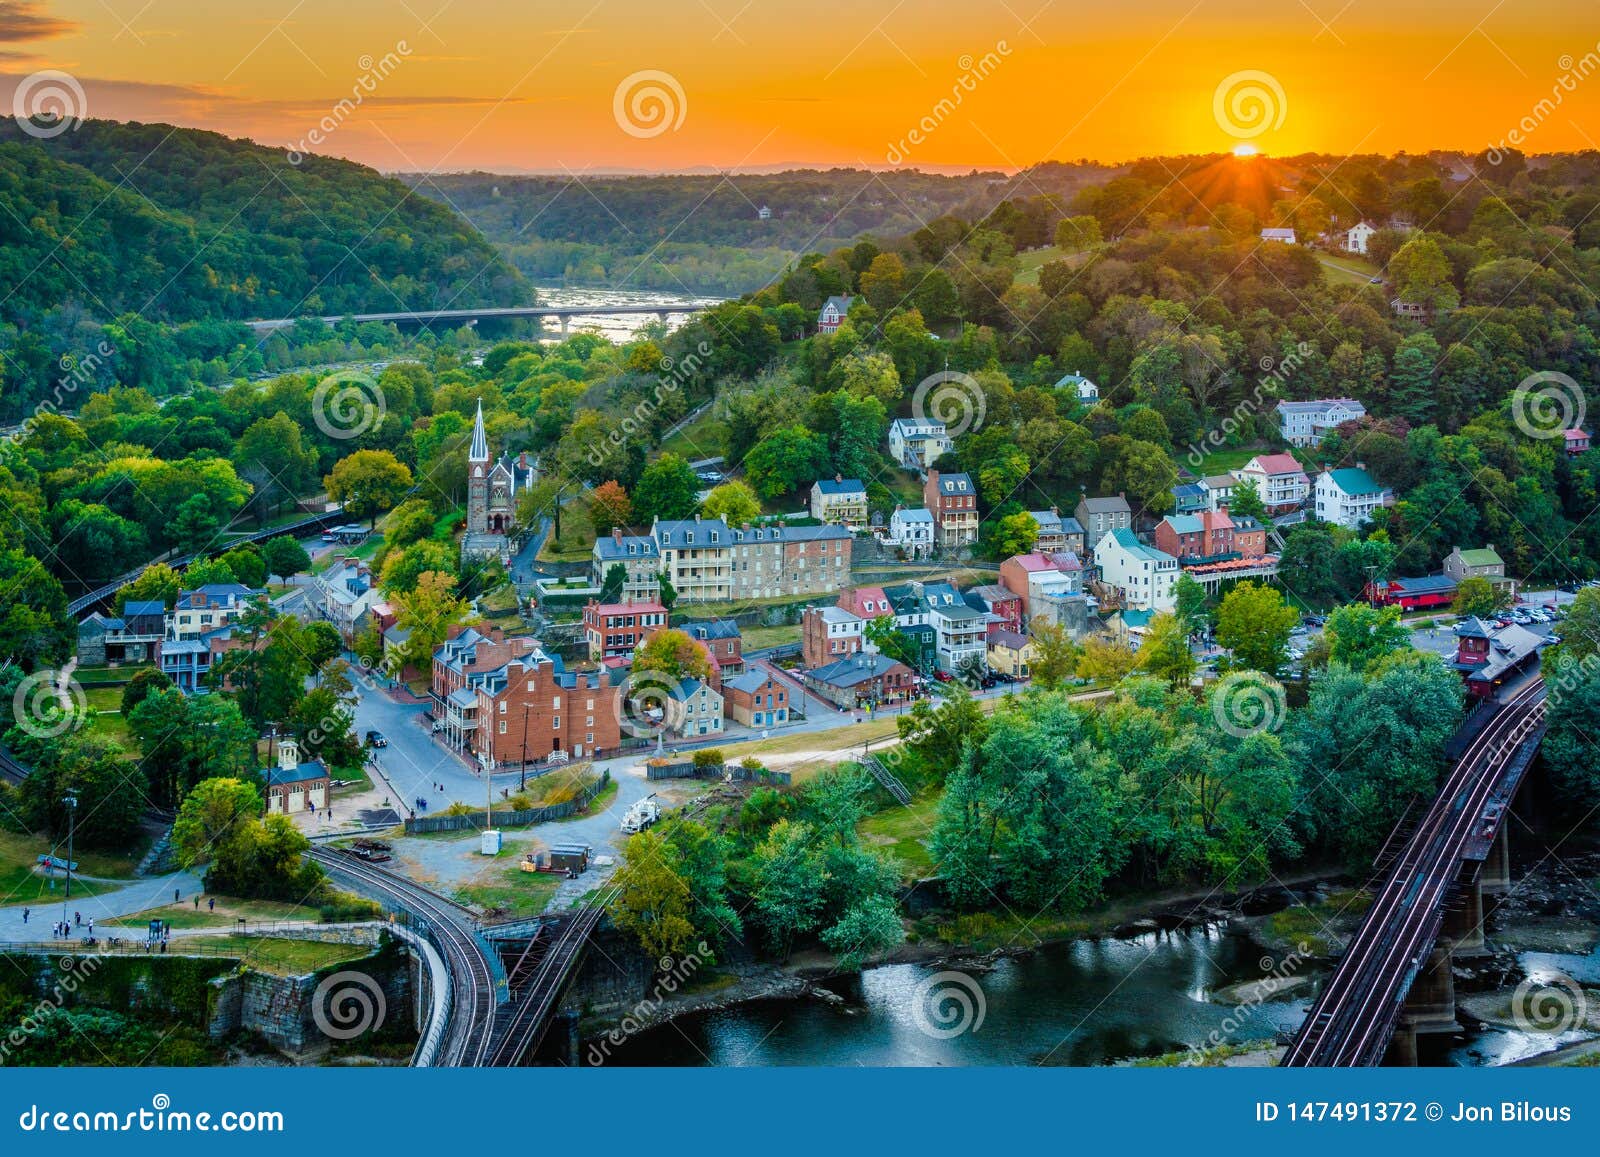 sunset view of harpers ferry, west virginia from maryland heights